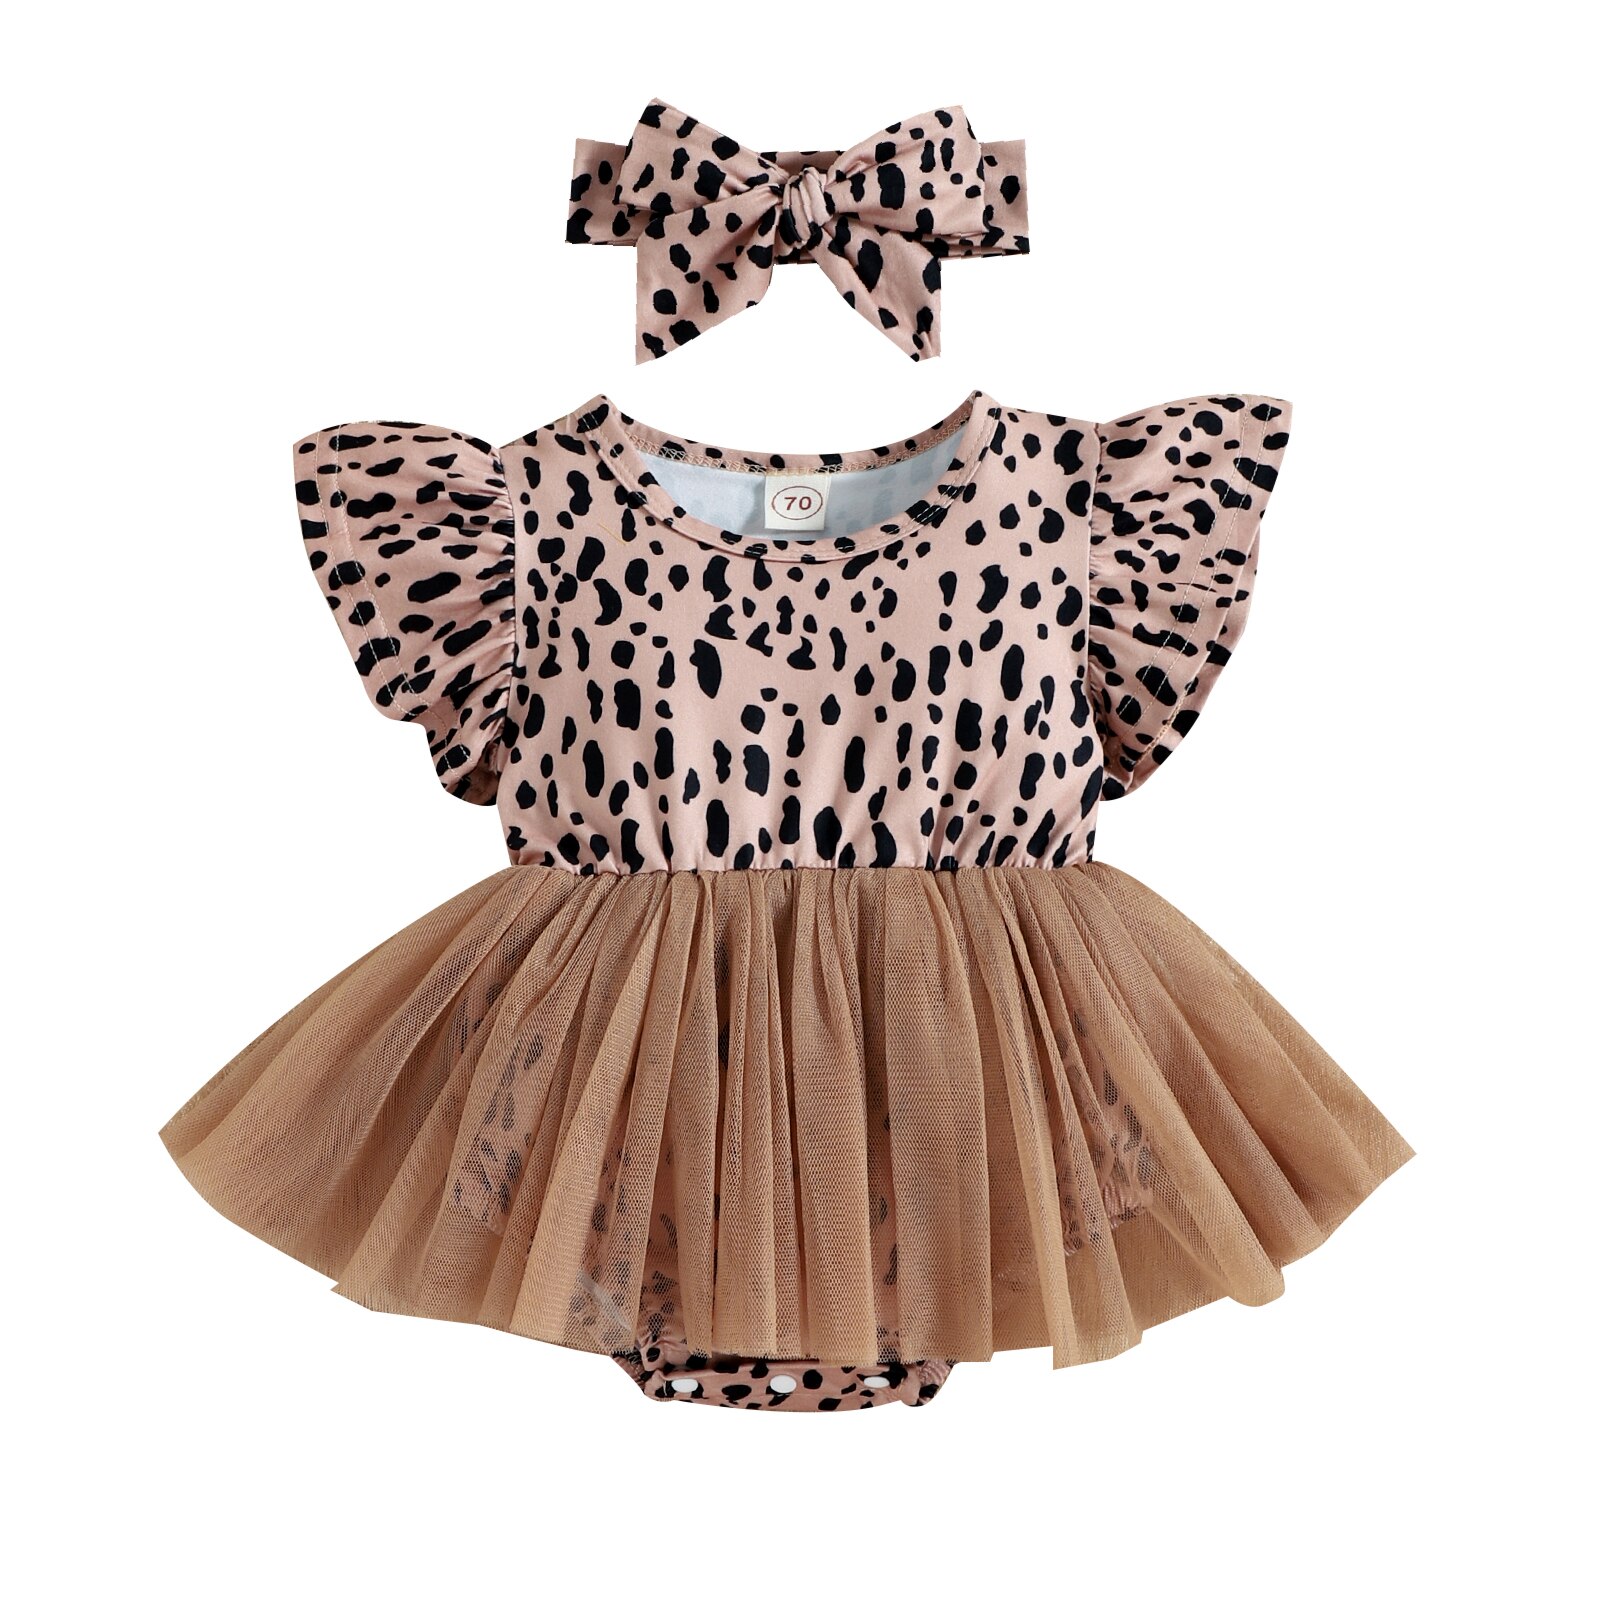 Ma-Baby-0-12M-Newborn-Infant-Baby-Girls-Romper-Leopard-Print-Tulle-Jumpsuit-Playsuit-Summer-Clothes-5